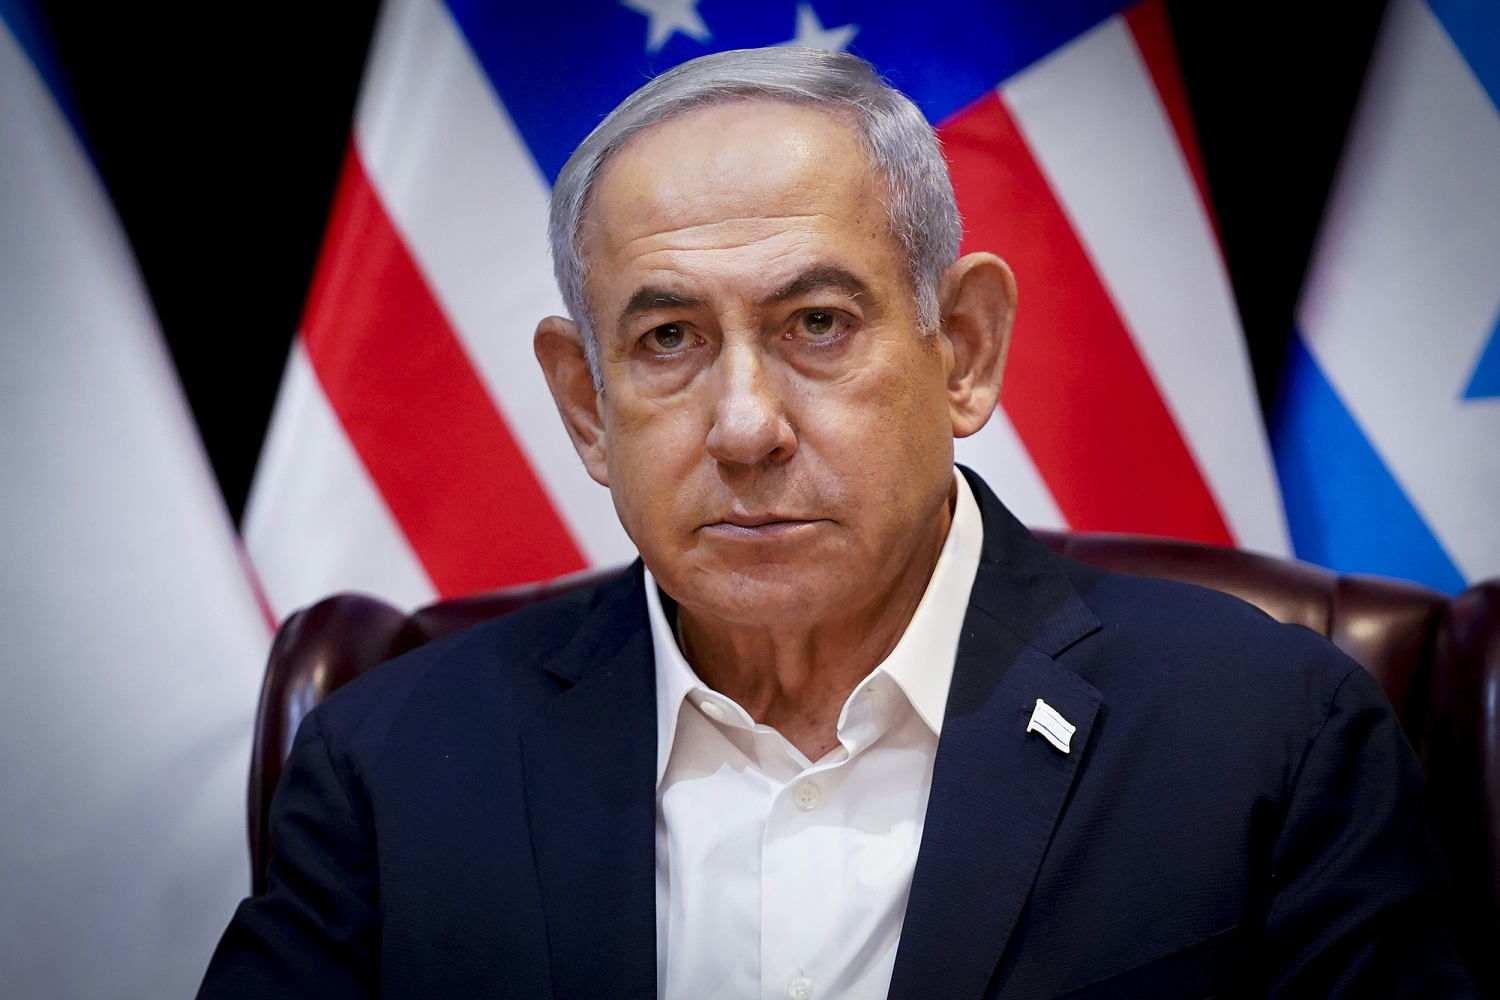 Pro-Israel lawmakers in both U.S. parties are losing confidence in Netanyahu